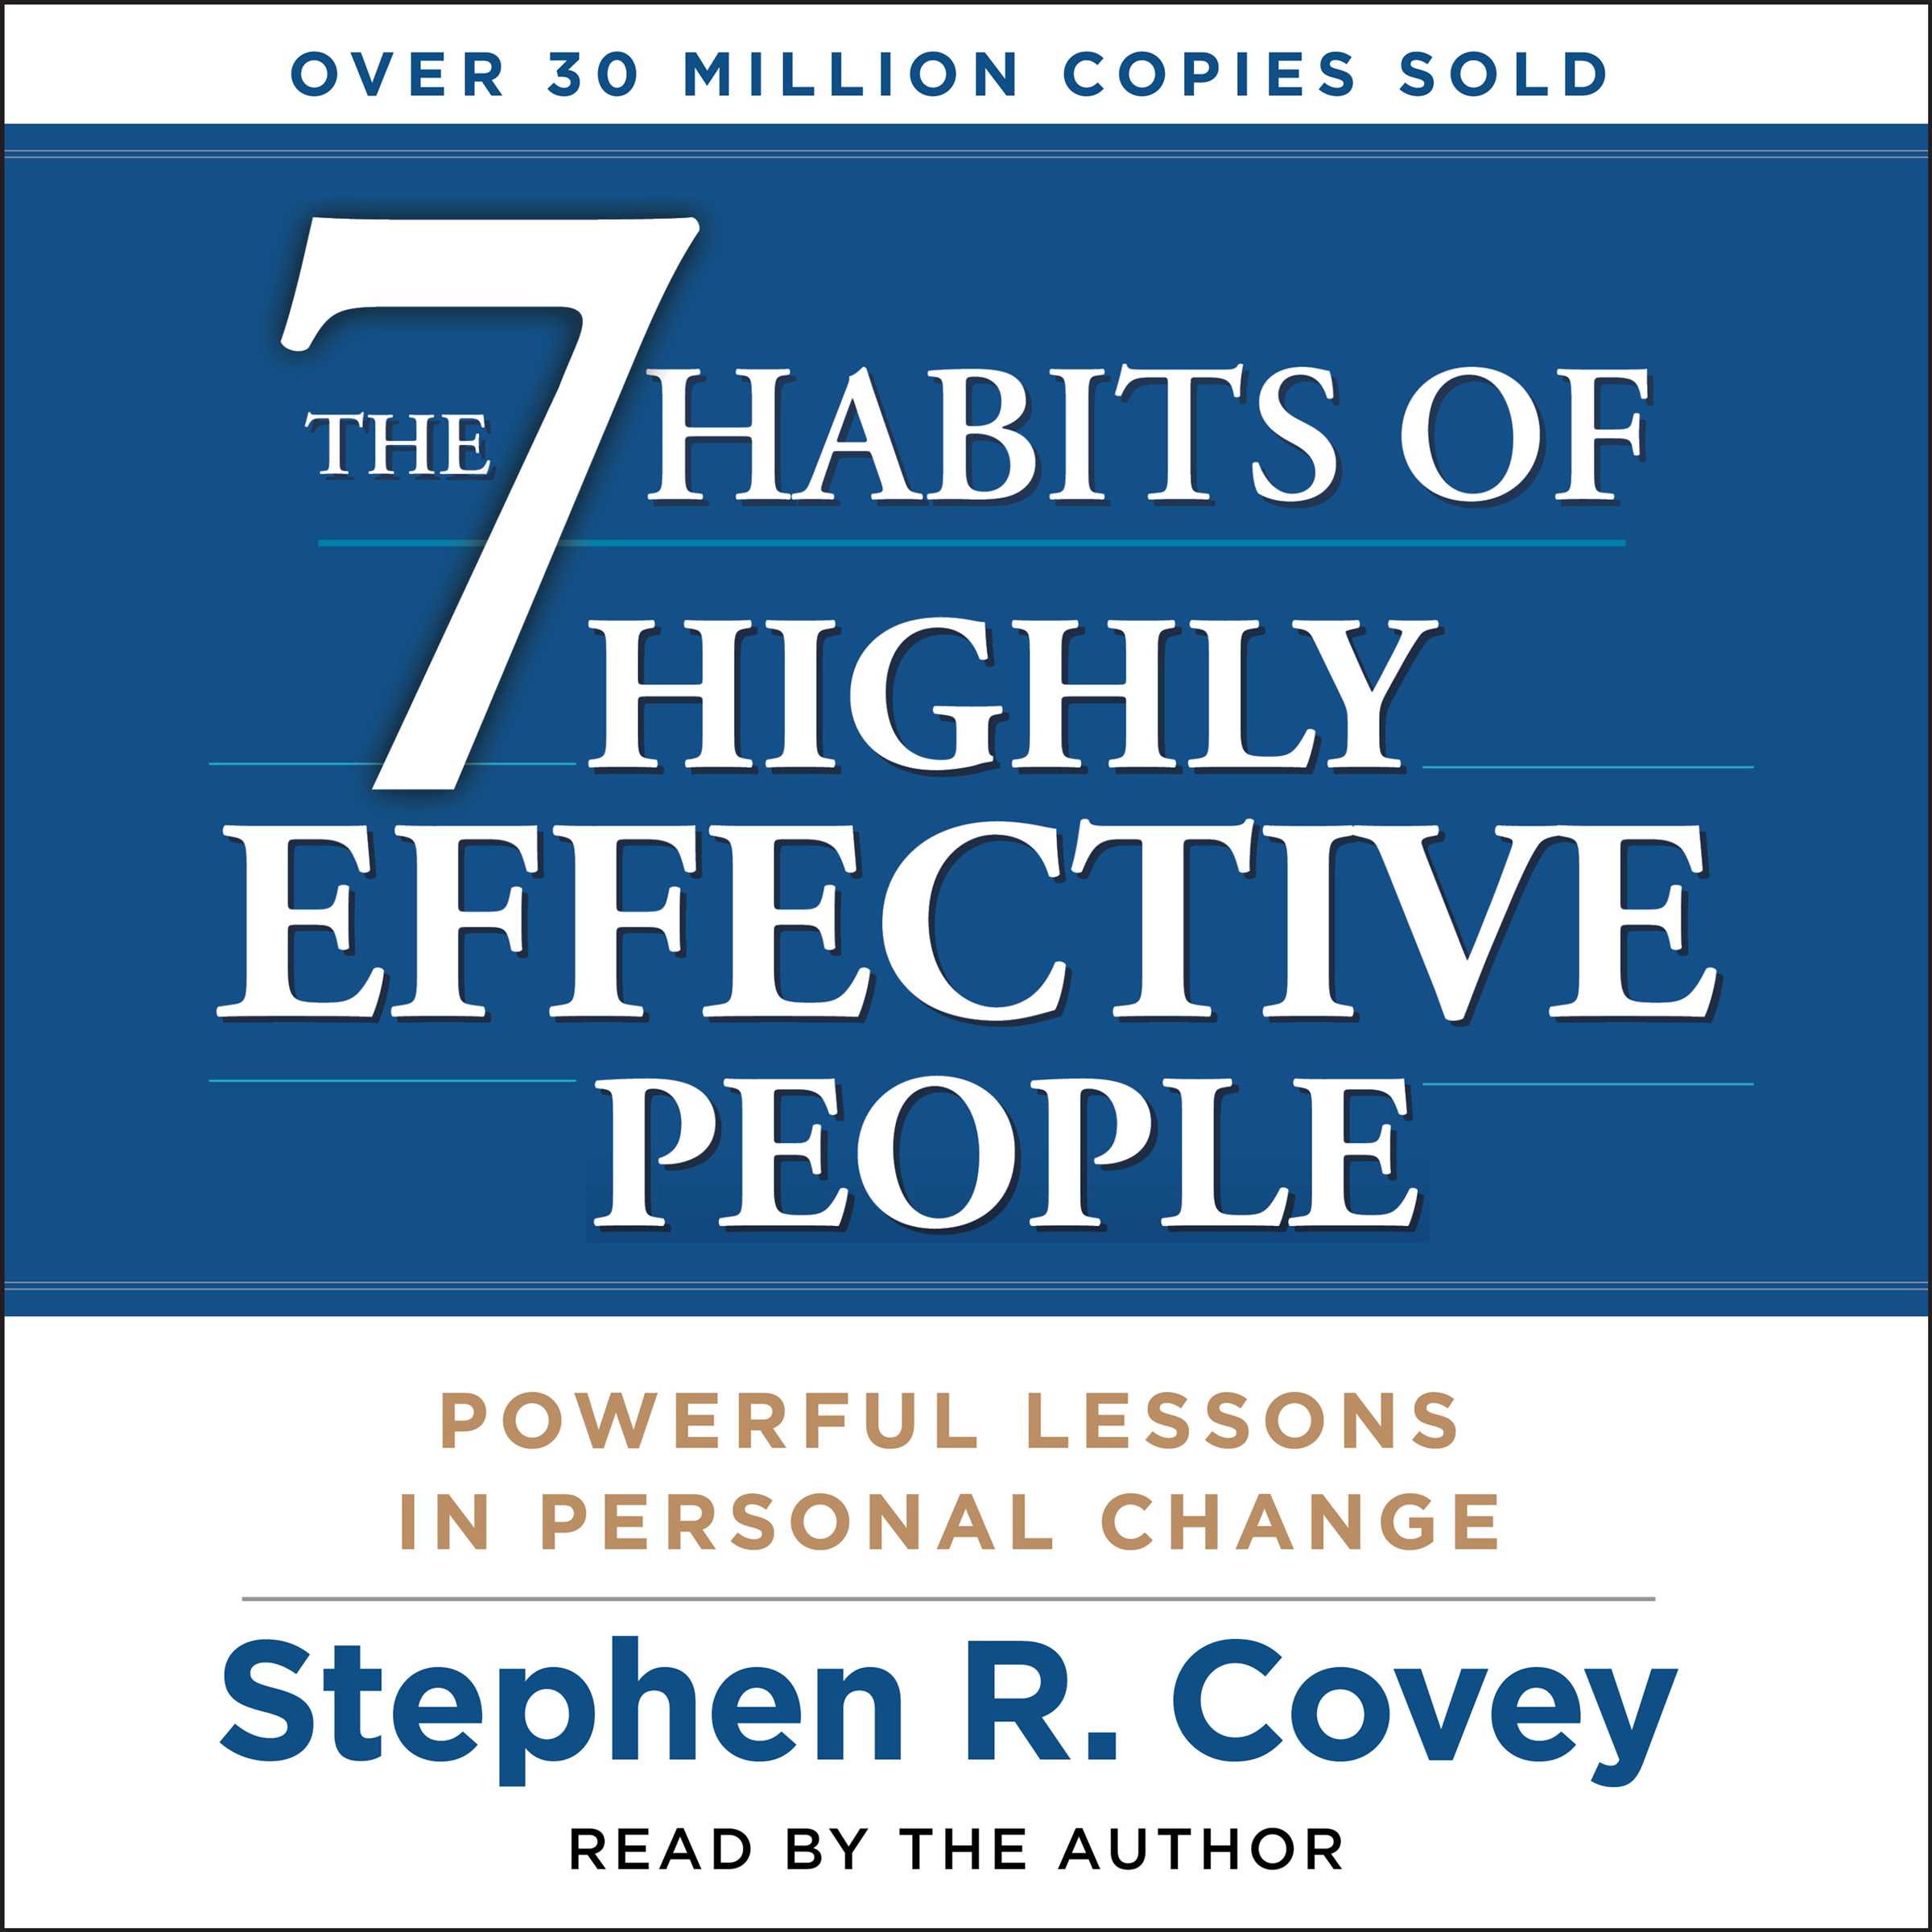 The 7 habits of highly effective people.jpg